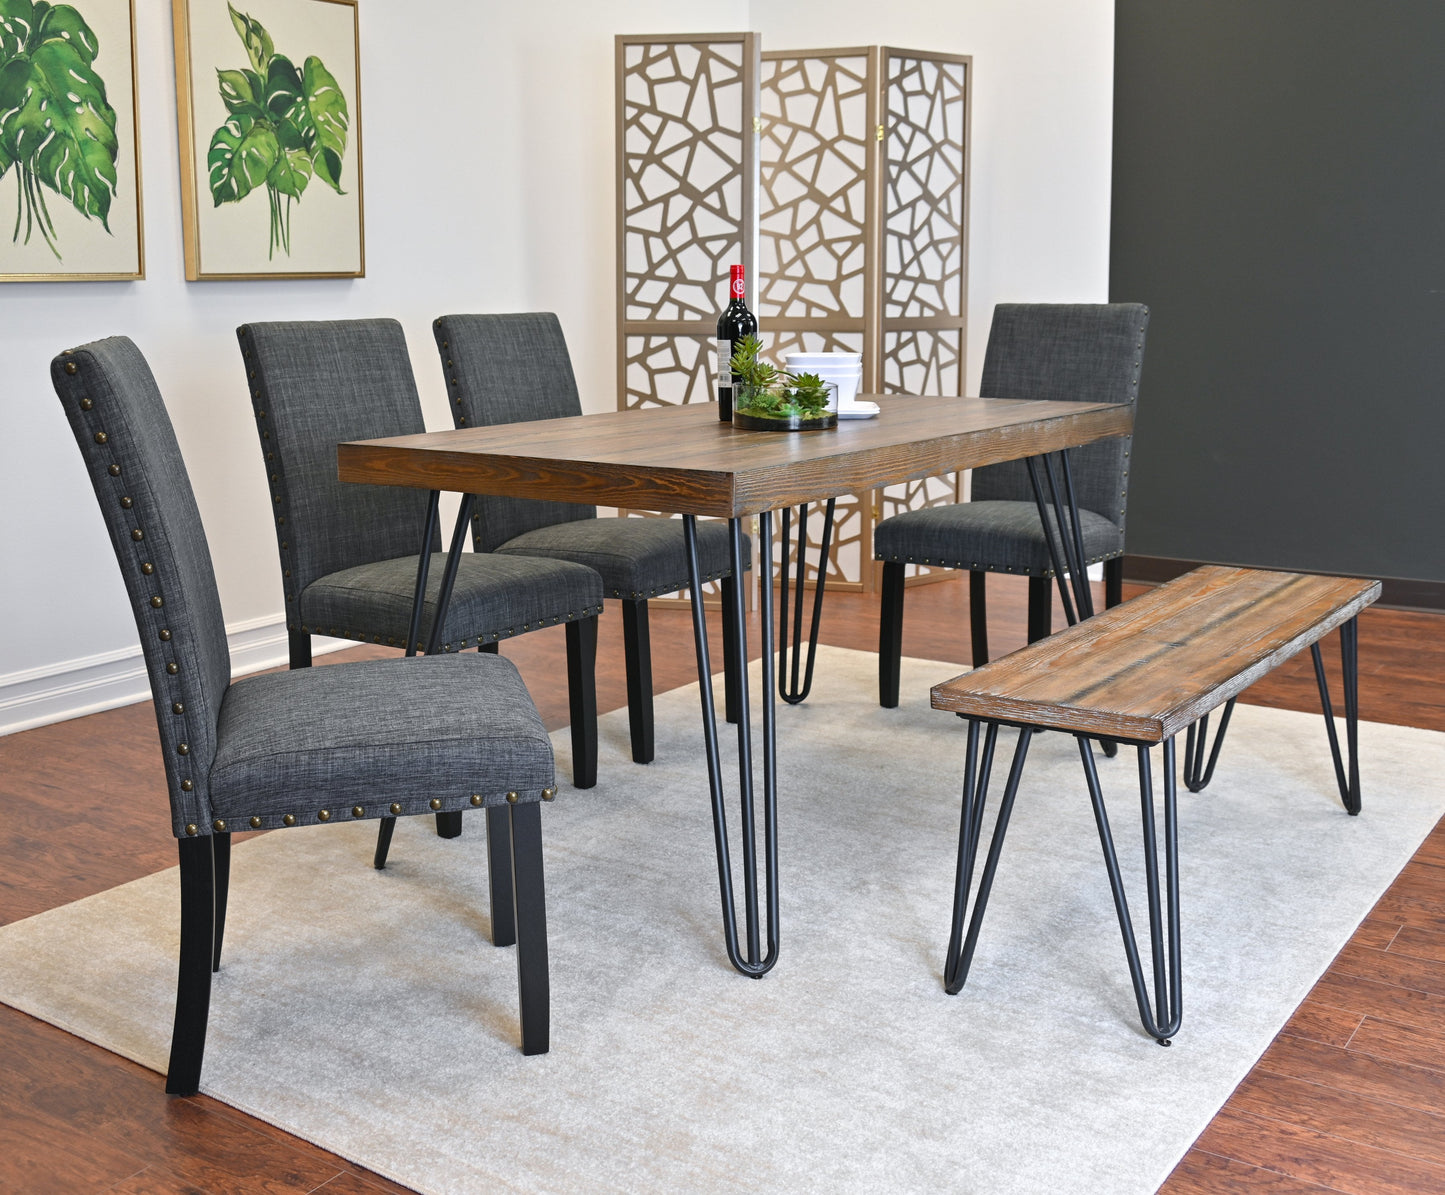 Amisos 6-Piece Dining Set, Hairpin Dining Table with 4 Chairs and a Wood Bench, 3 Color Options